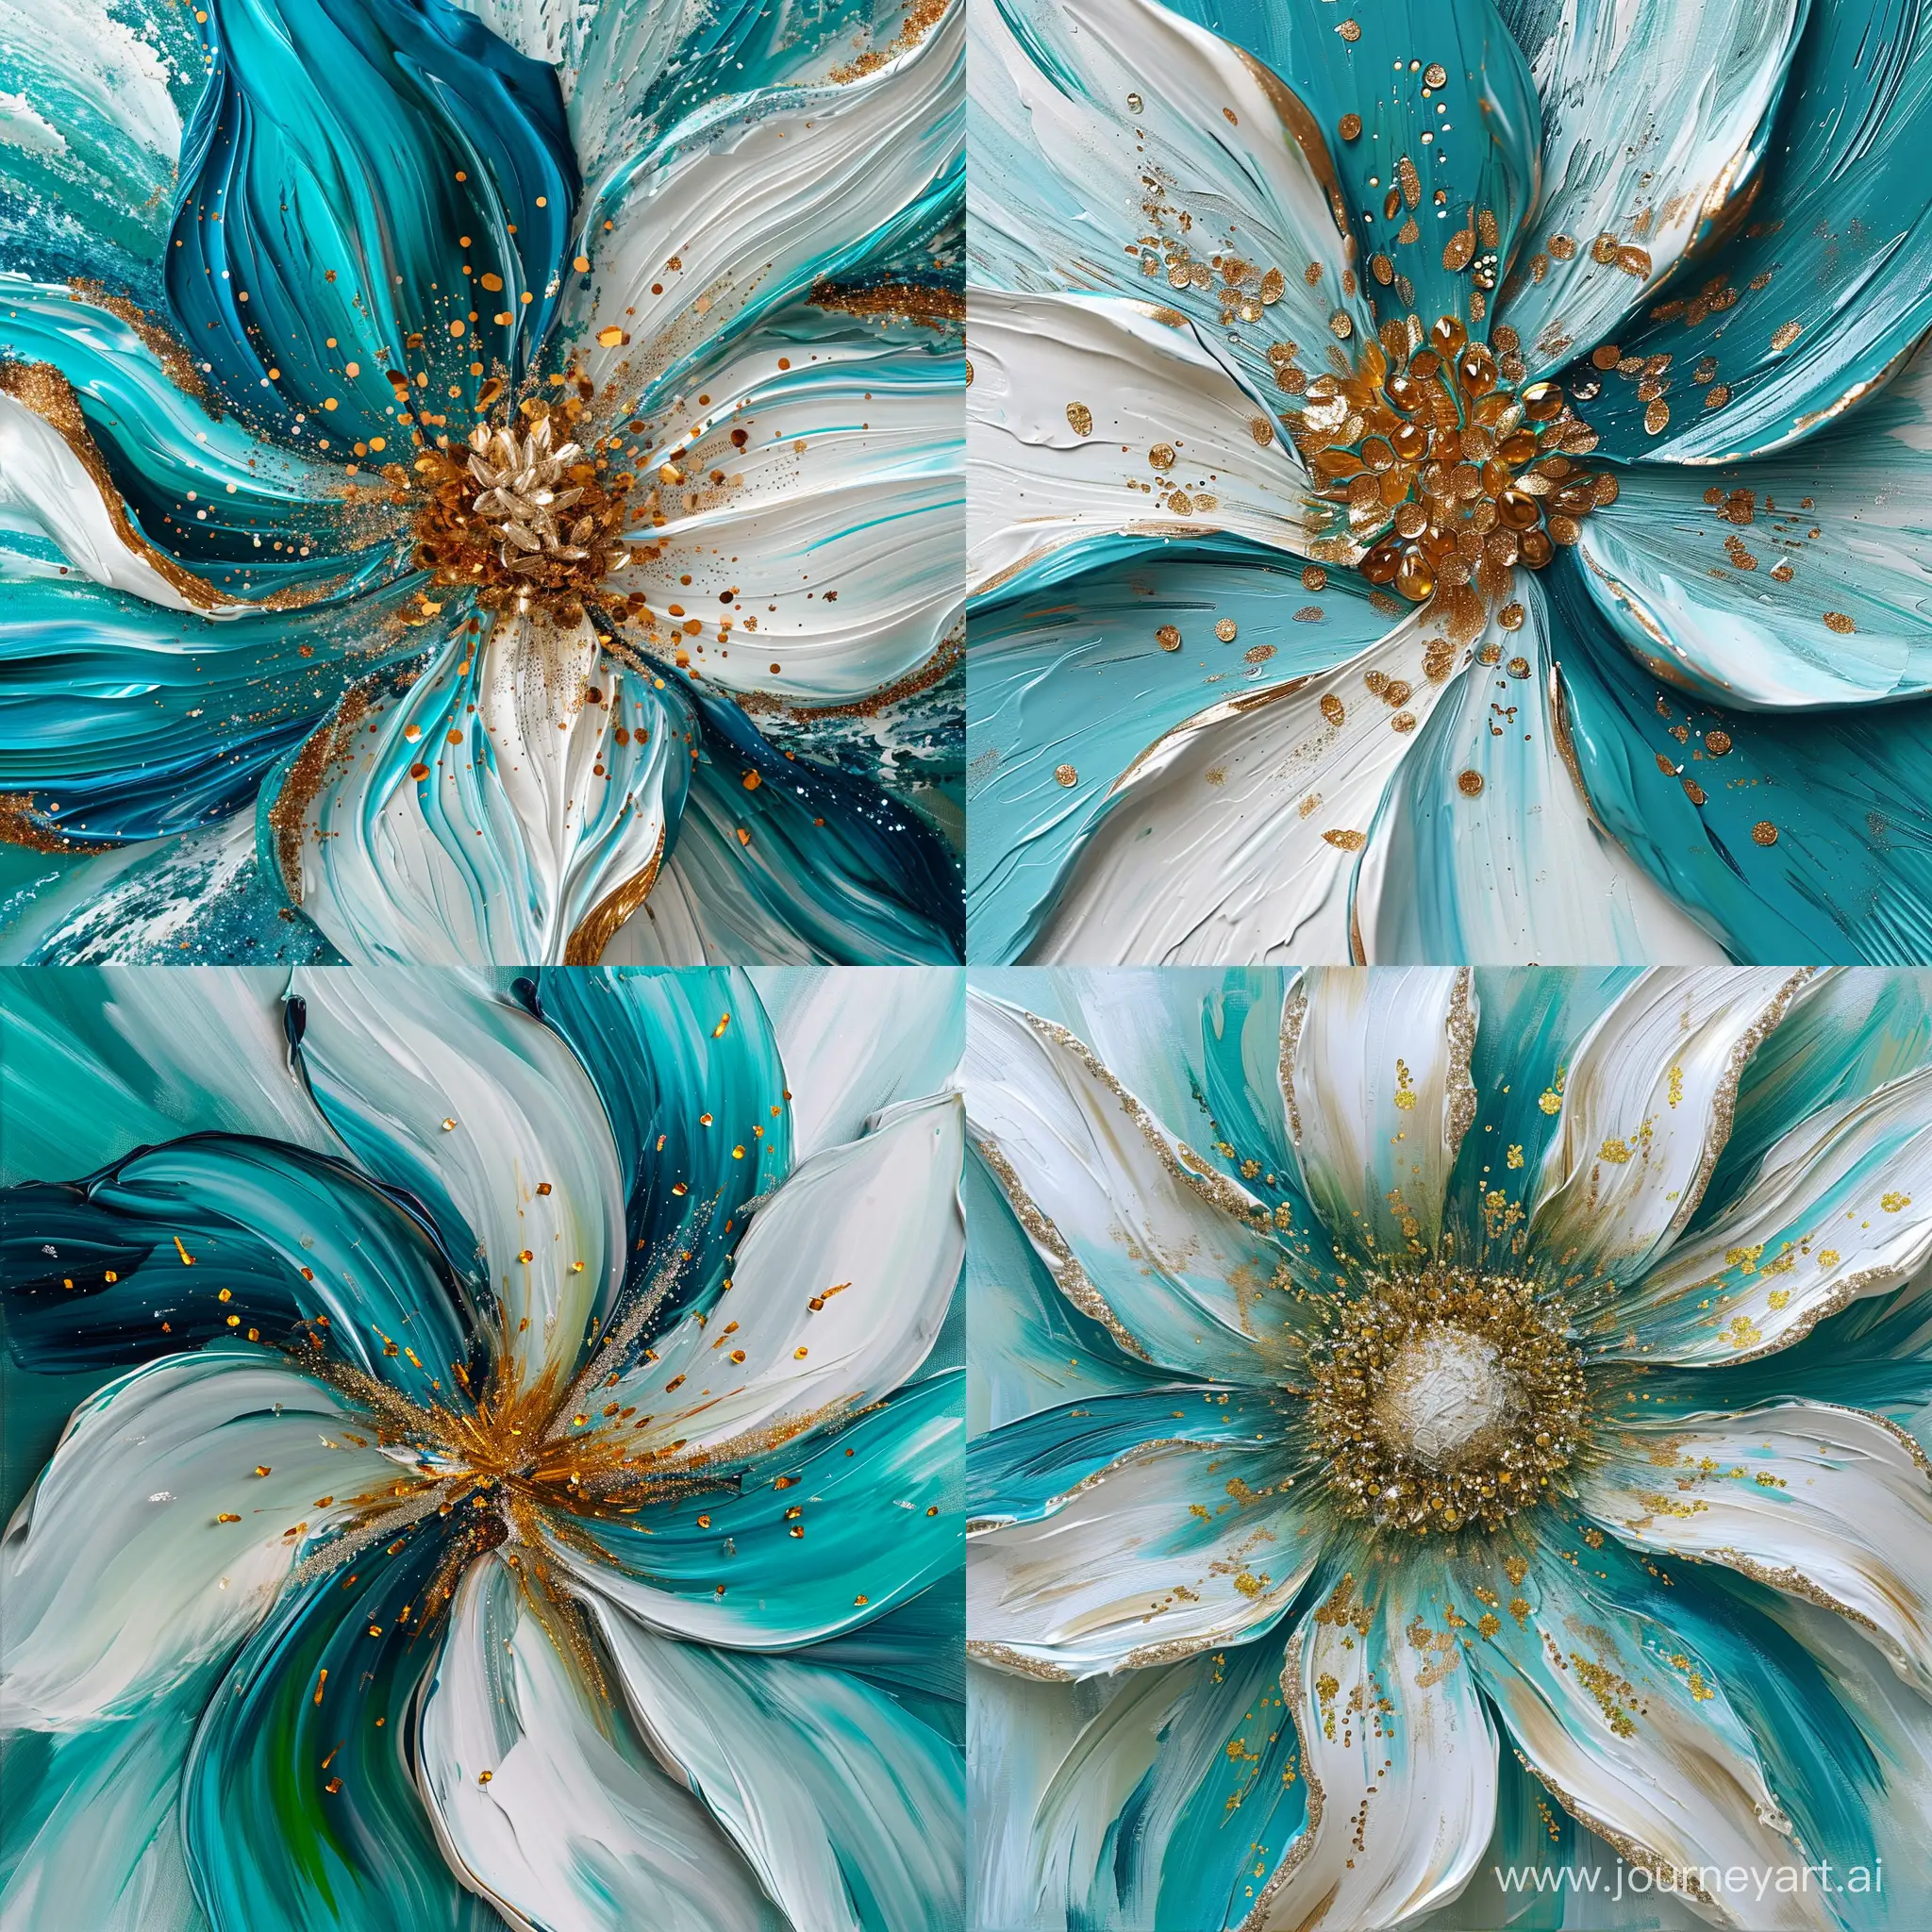 Surreal-Flower-Painting-with-Turquoise-and-Gold-Accents